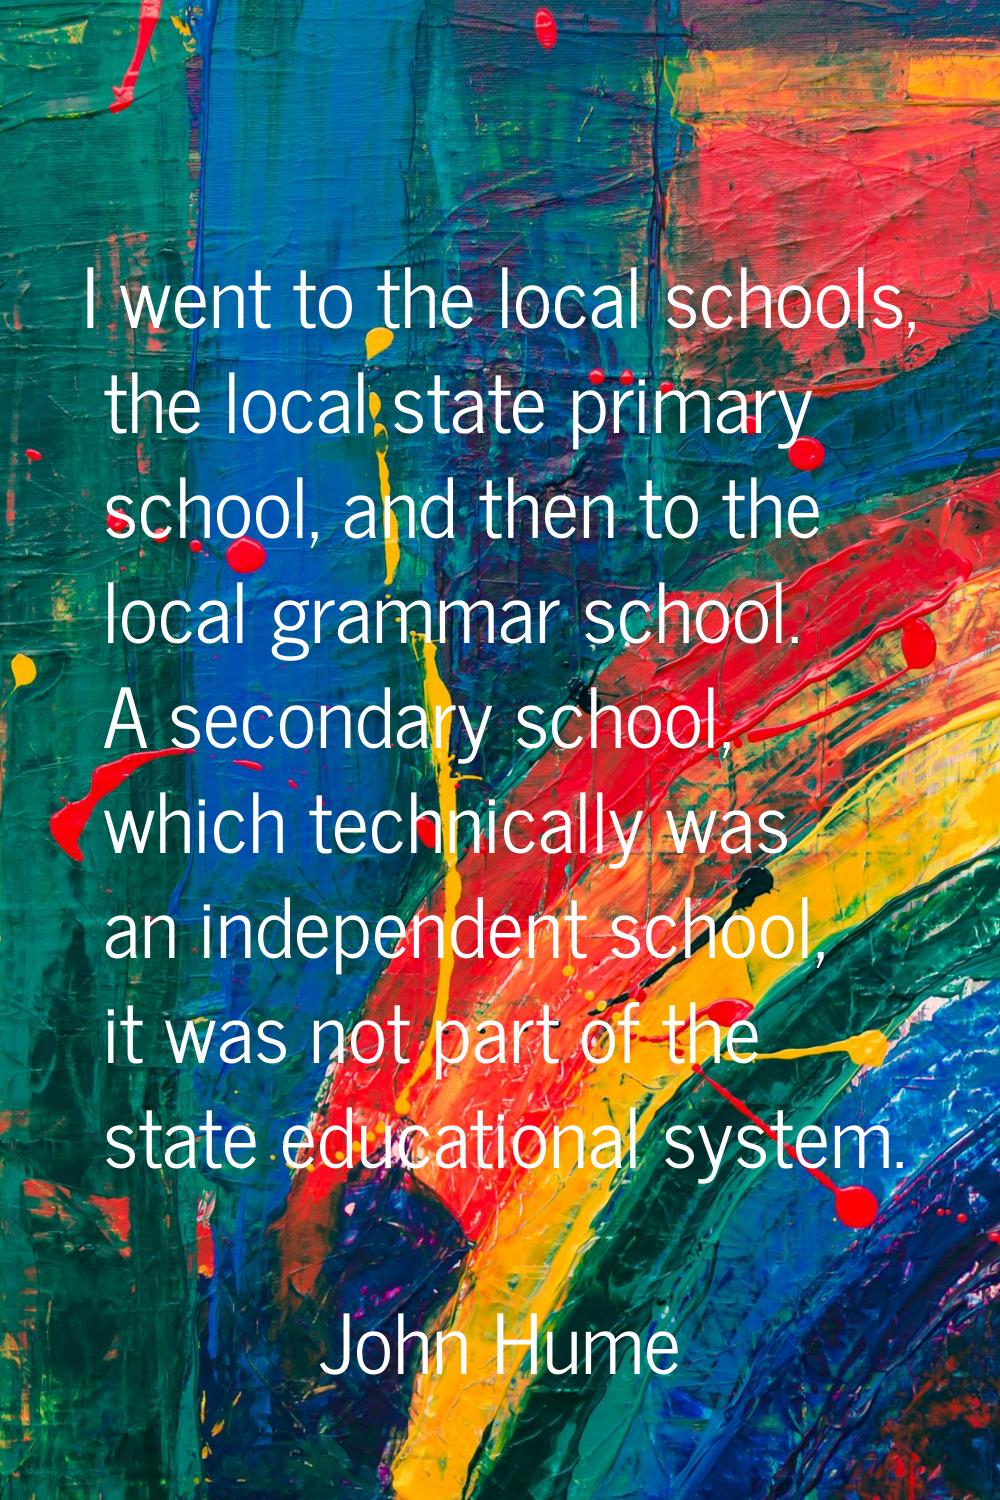 I went to the local schools, the local state primary school, and then to the local grammar school. 